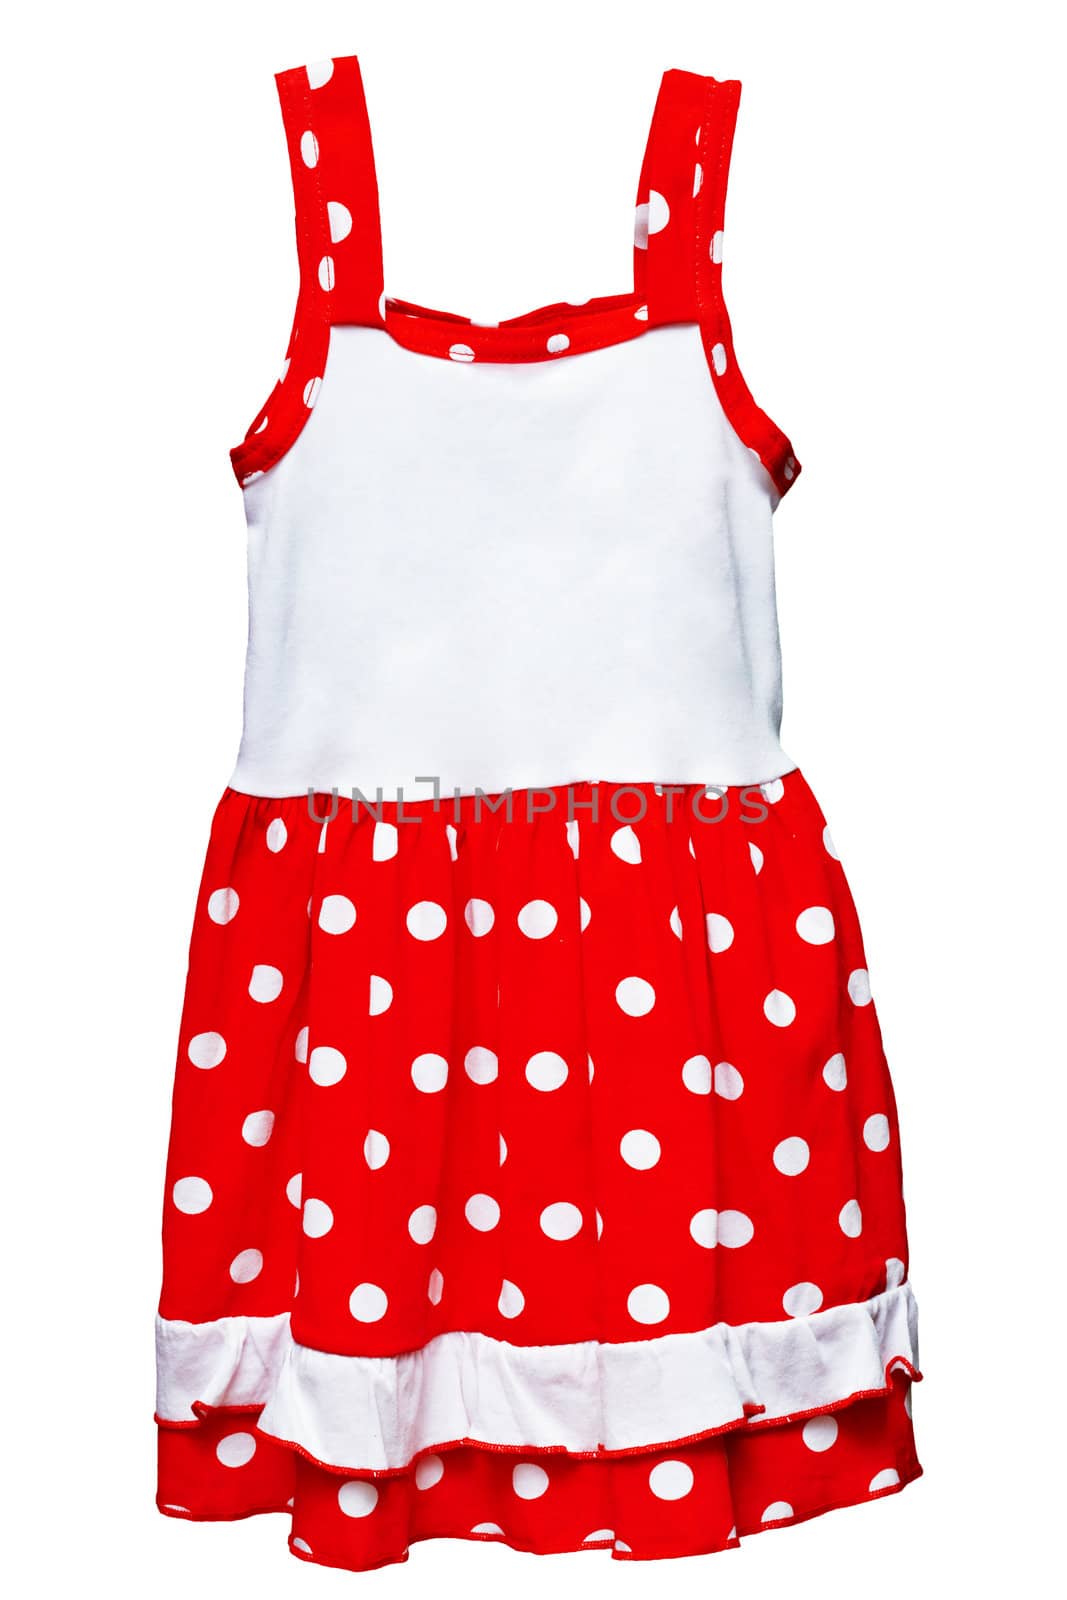 Small red polka dot dress for girls isolated on white background